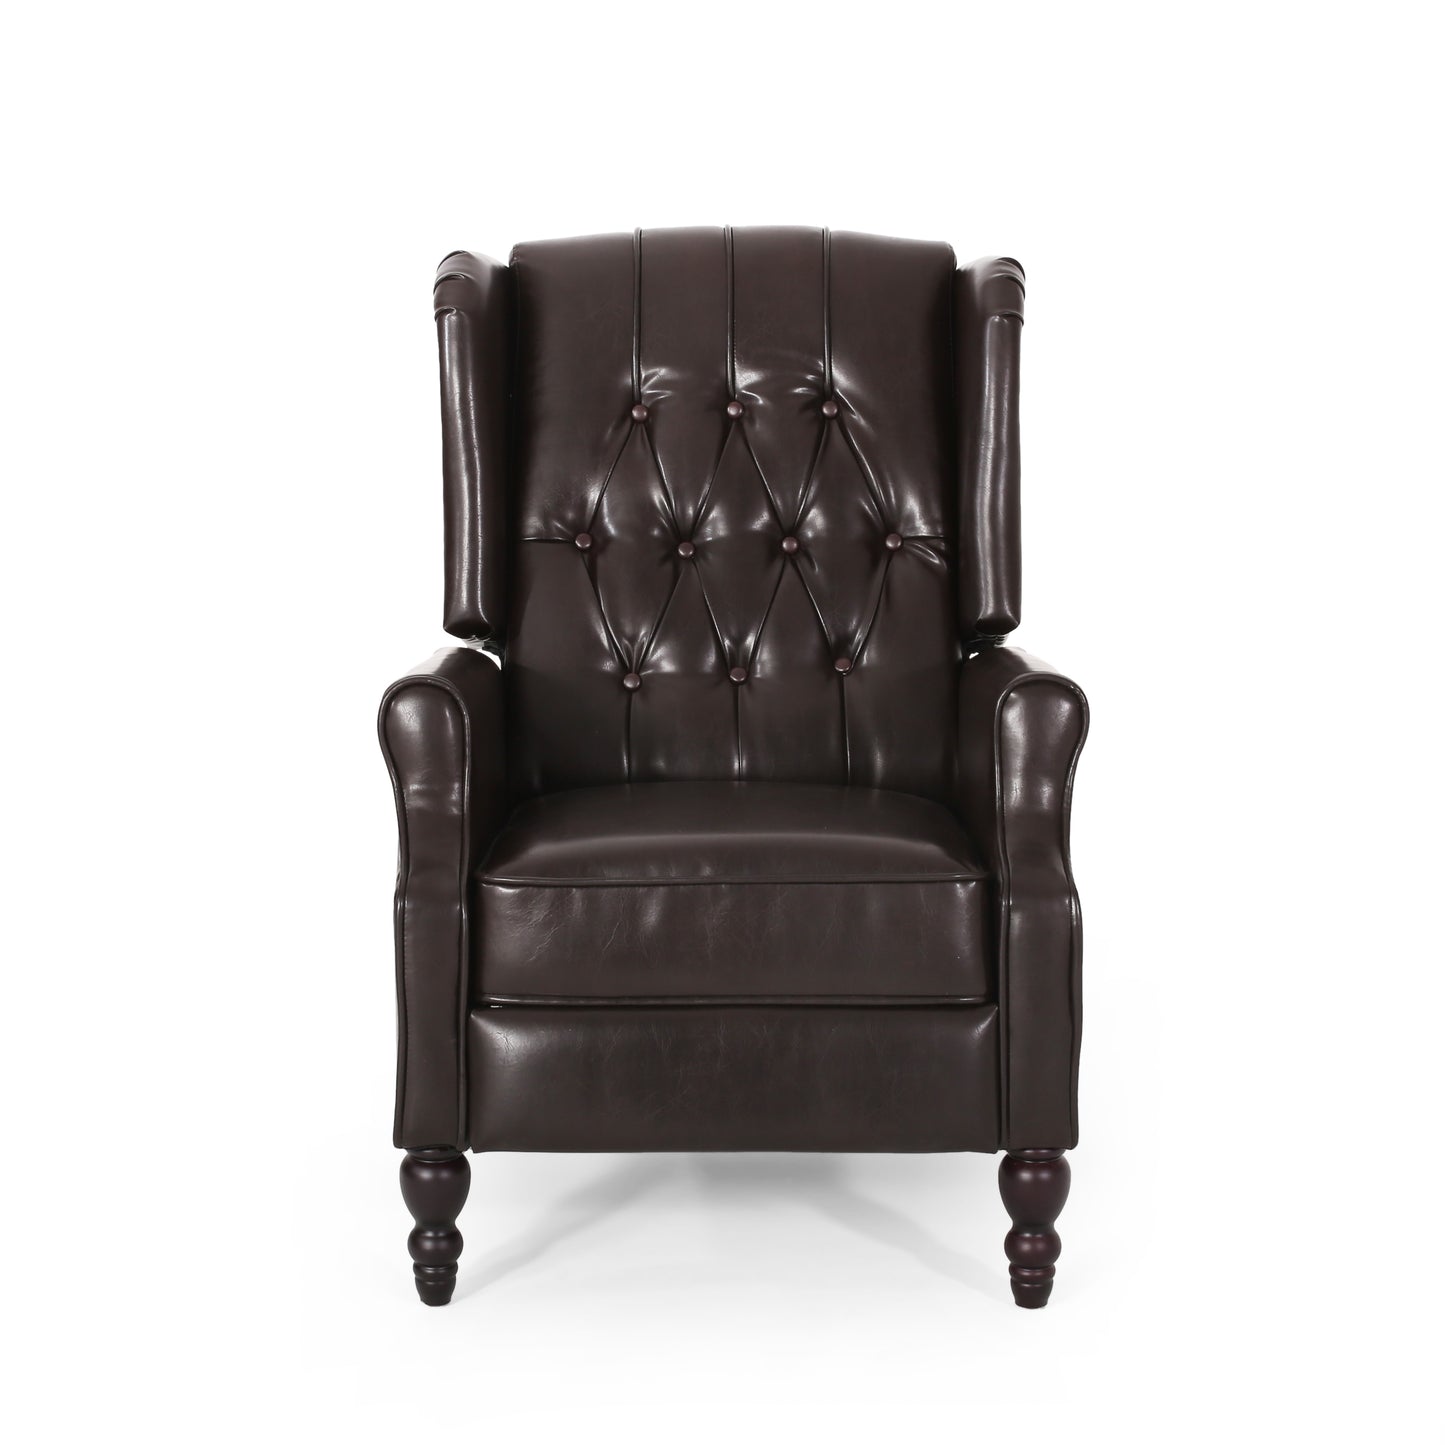 Elizabeth Contemporary Tufted Bonded Leather Recliner (Set of 2)